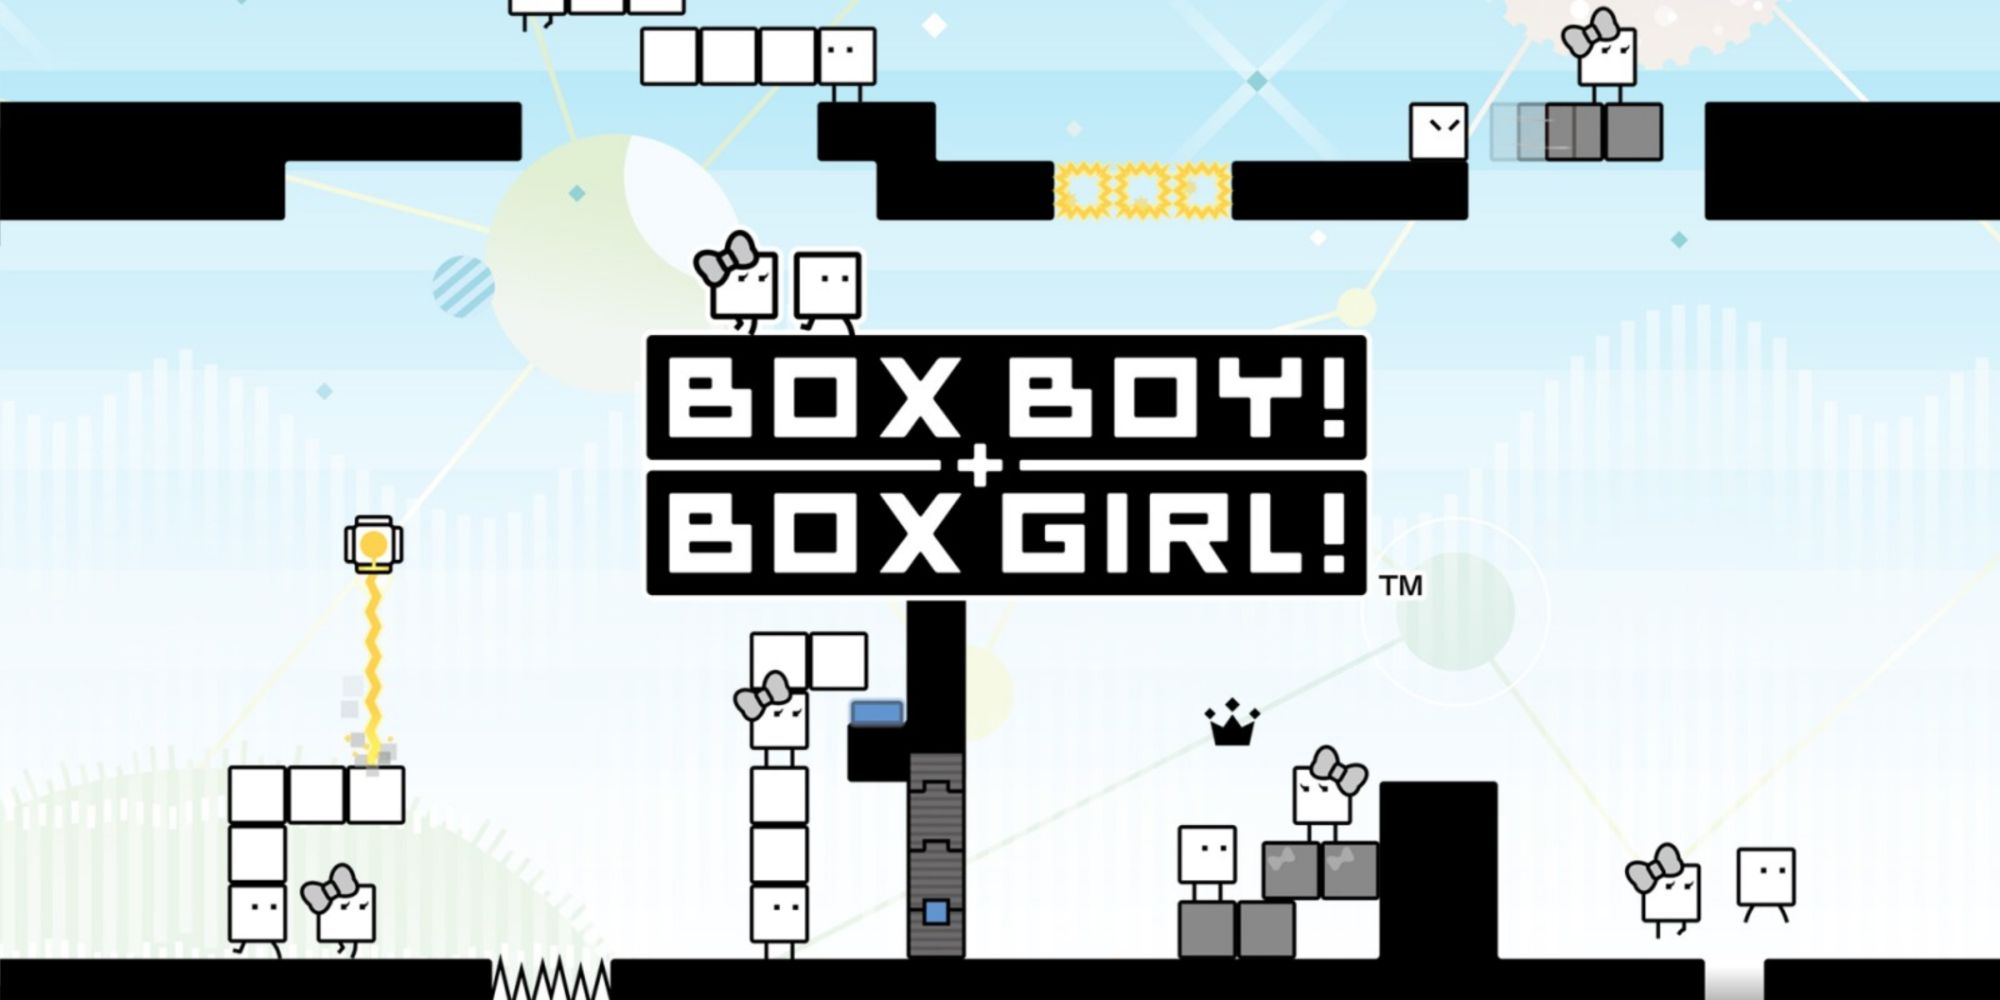 BoxBoy! + BoxGirl! cover art/poster with suggested gameplay elements